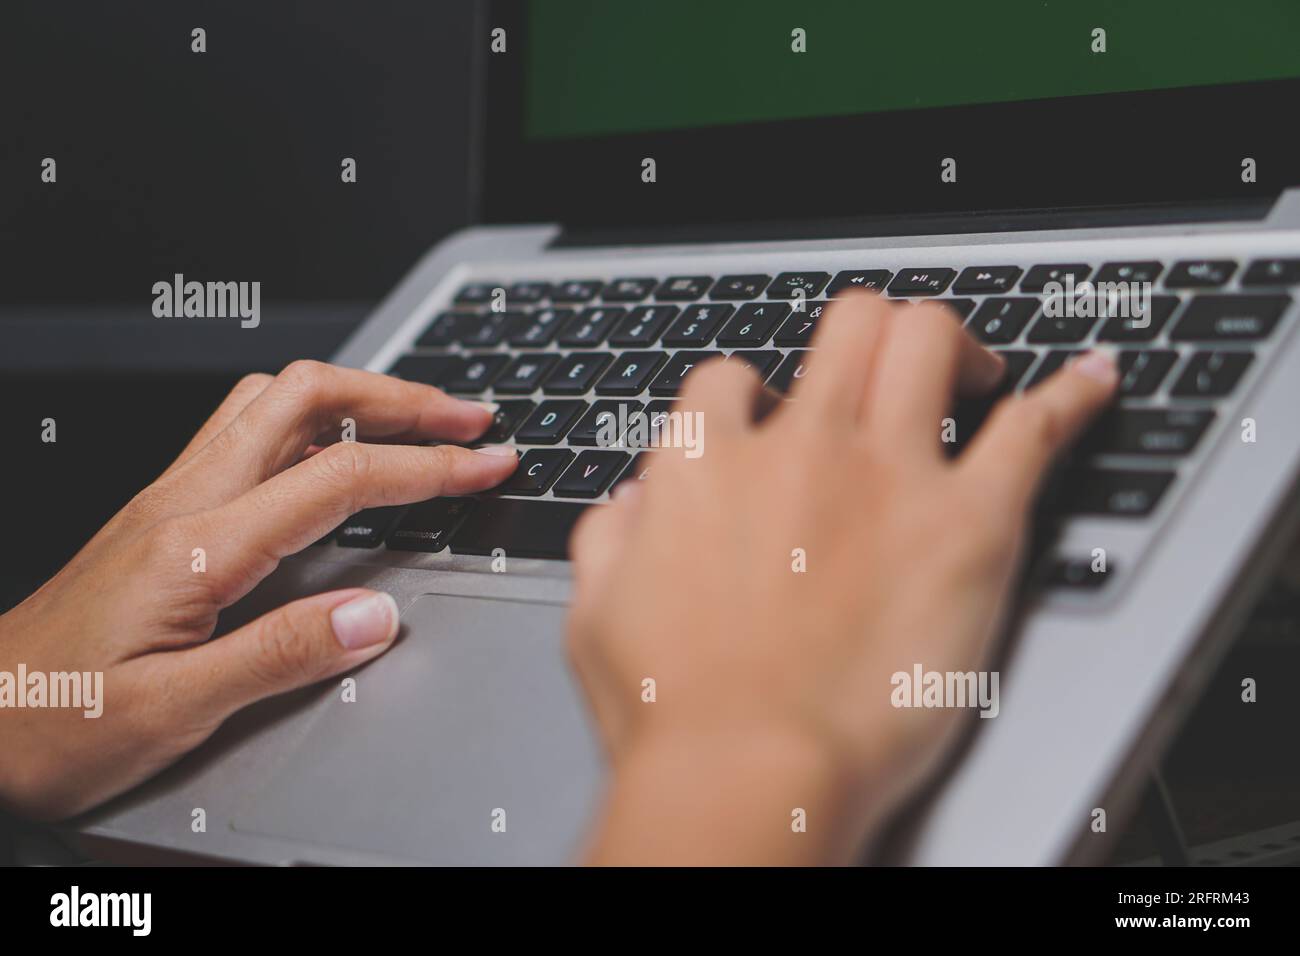 woman working on laptop with green chroma copy space screen background for advertising text, empty space Stock Photo